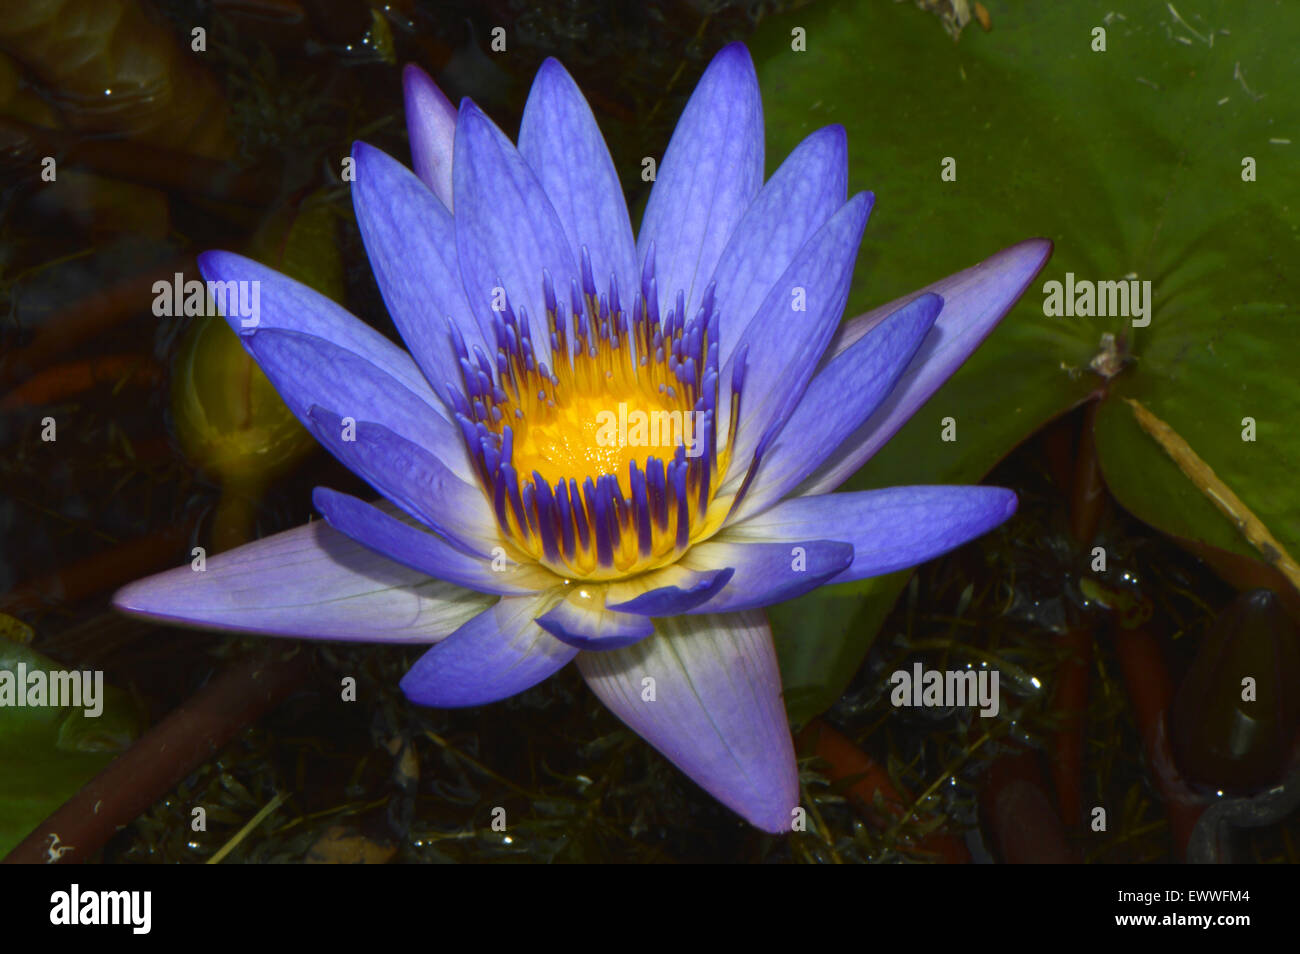 Blue waterlily flower Latin name Nymphaea sp.Waterlily Blue Stock Photo